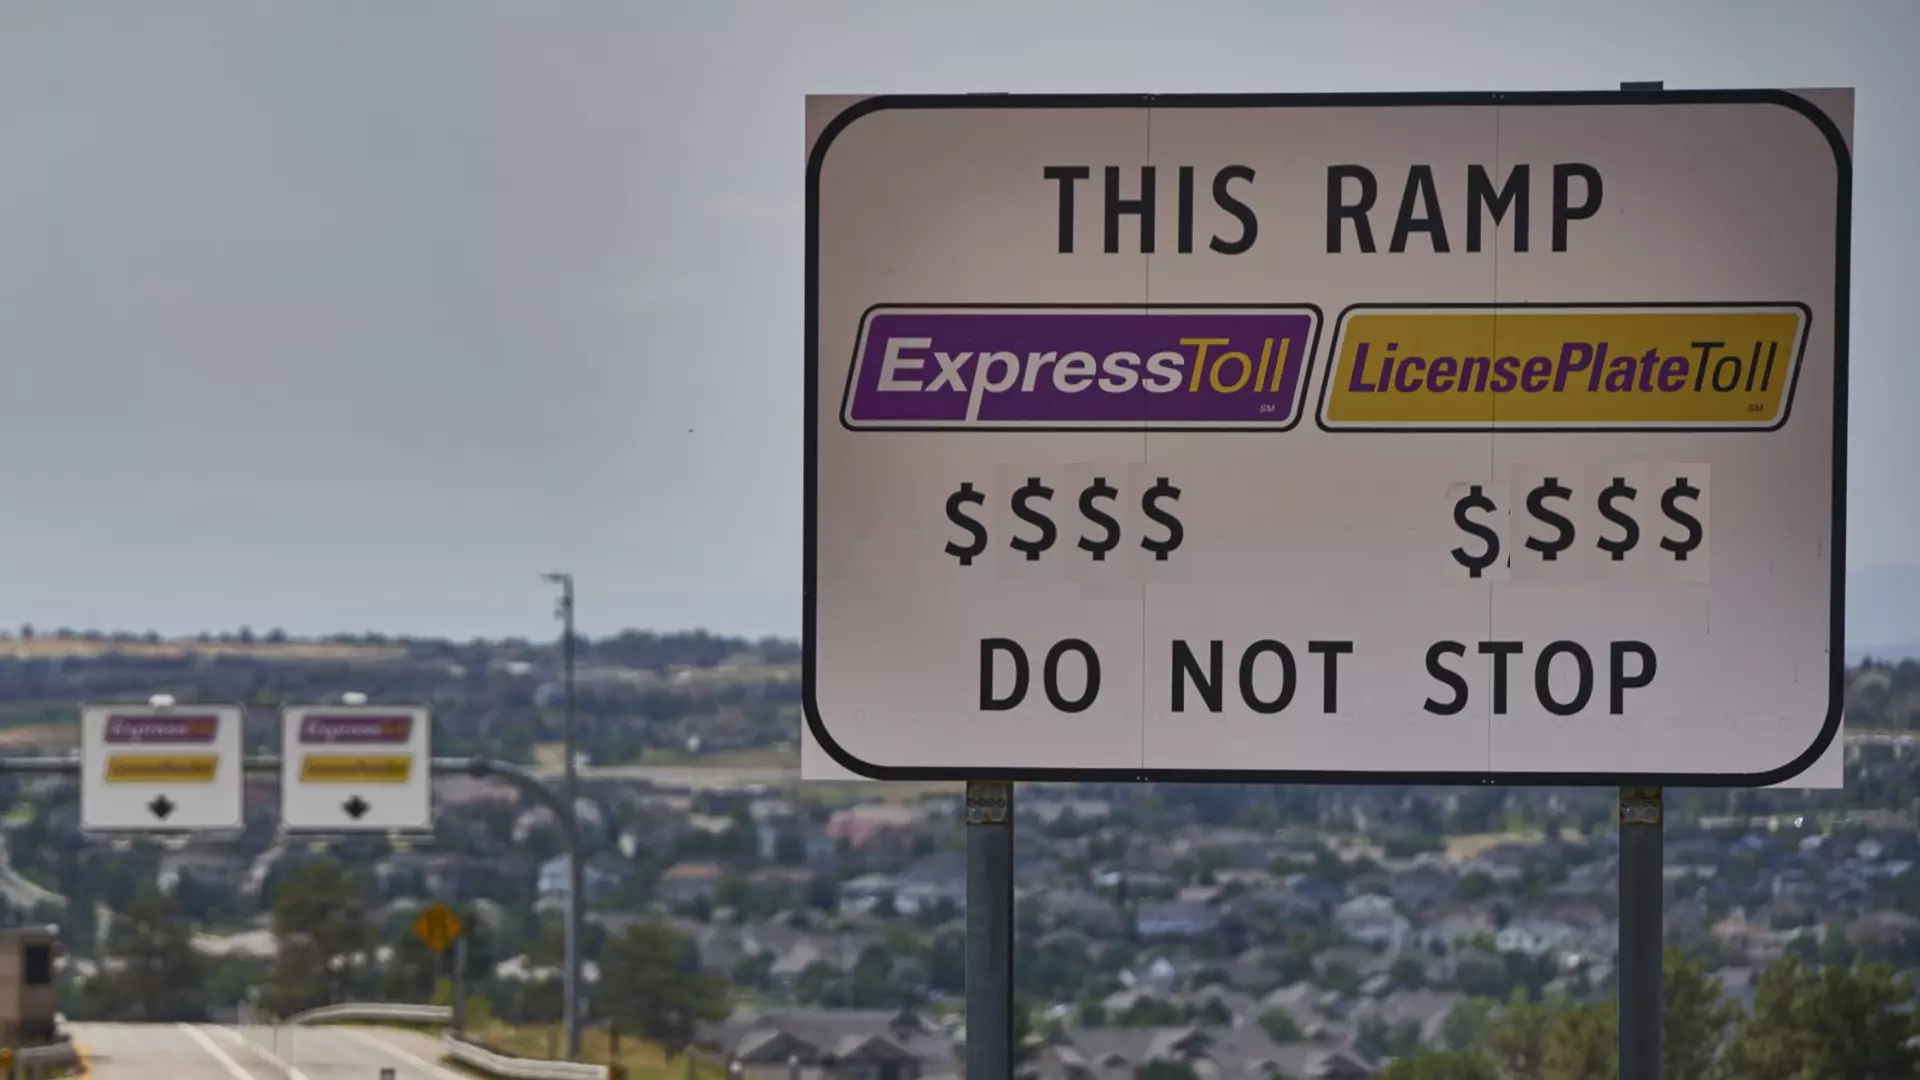 Before You Drive a Rental Car, Don’t Forget To Check the Toll Fee Policies